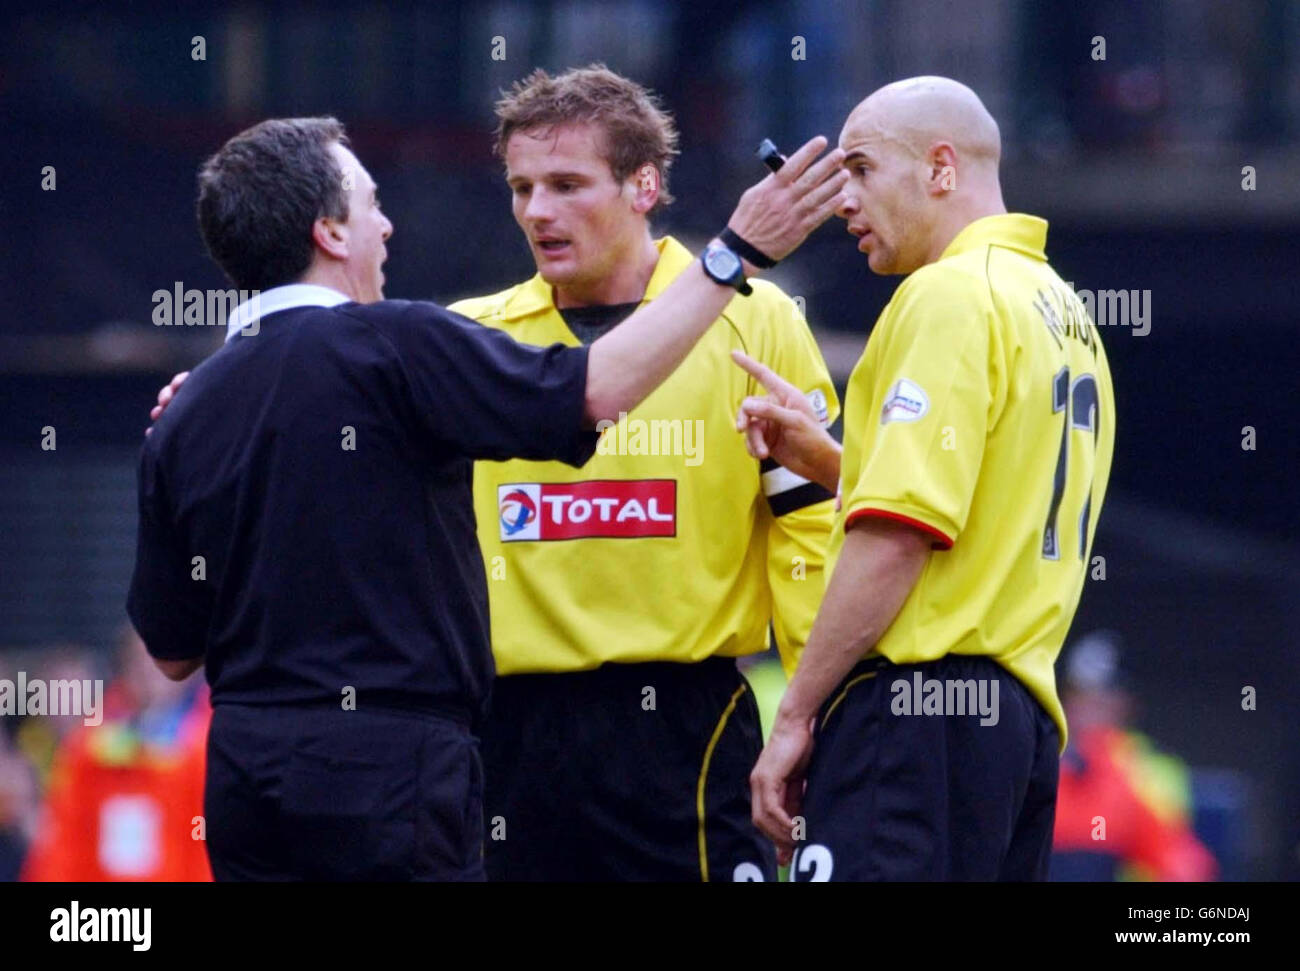 Watford's Neal Ardley and Gavin Mahon talk to referee Alan Wiley after he awarded a penalty to Chelsea during the FA Cup Third Round match at Watford's Vicarage Road ground. Final score 2-2. Stock Photo